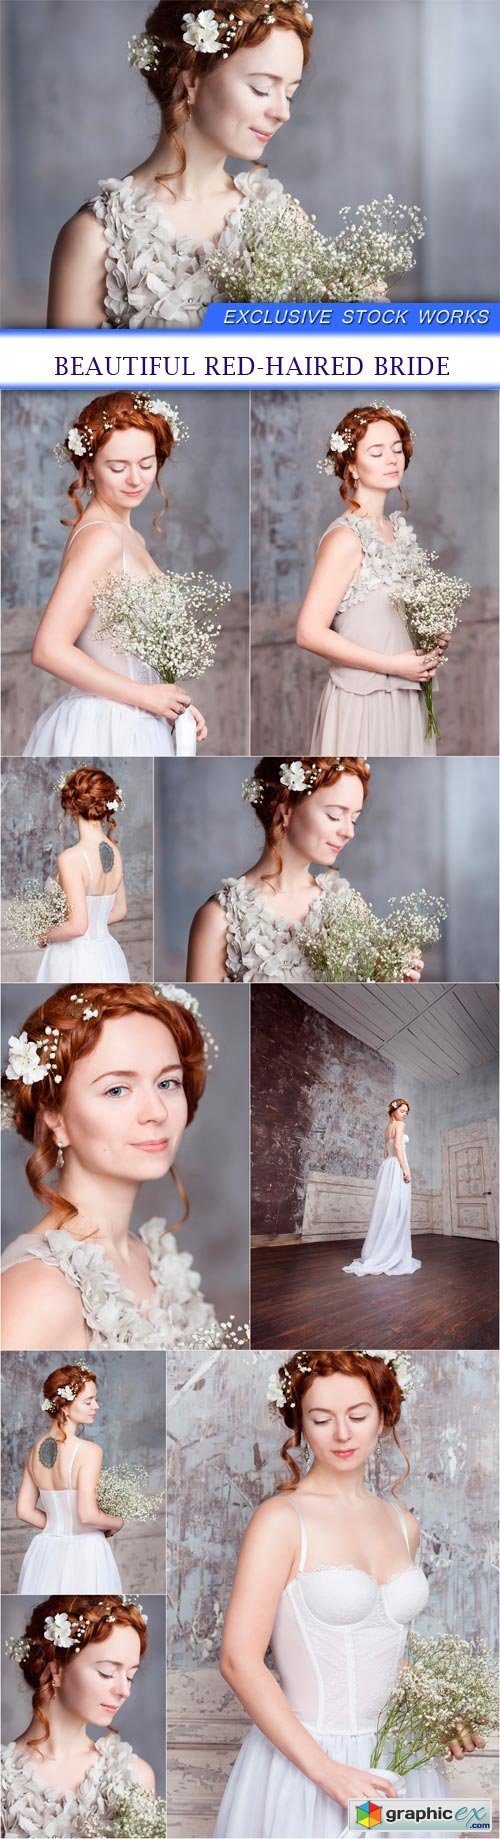 beautiful red-haired bride 9X JPEG